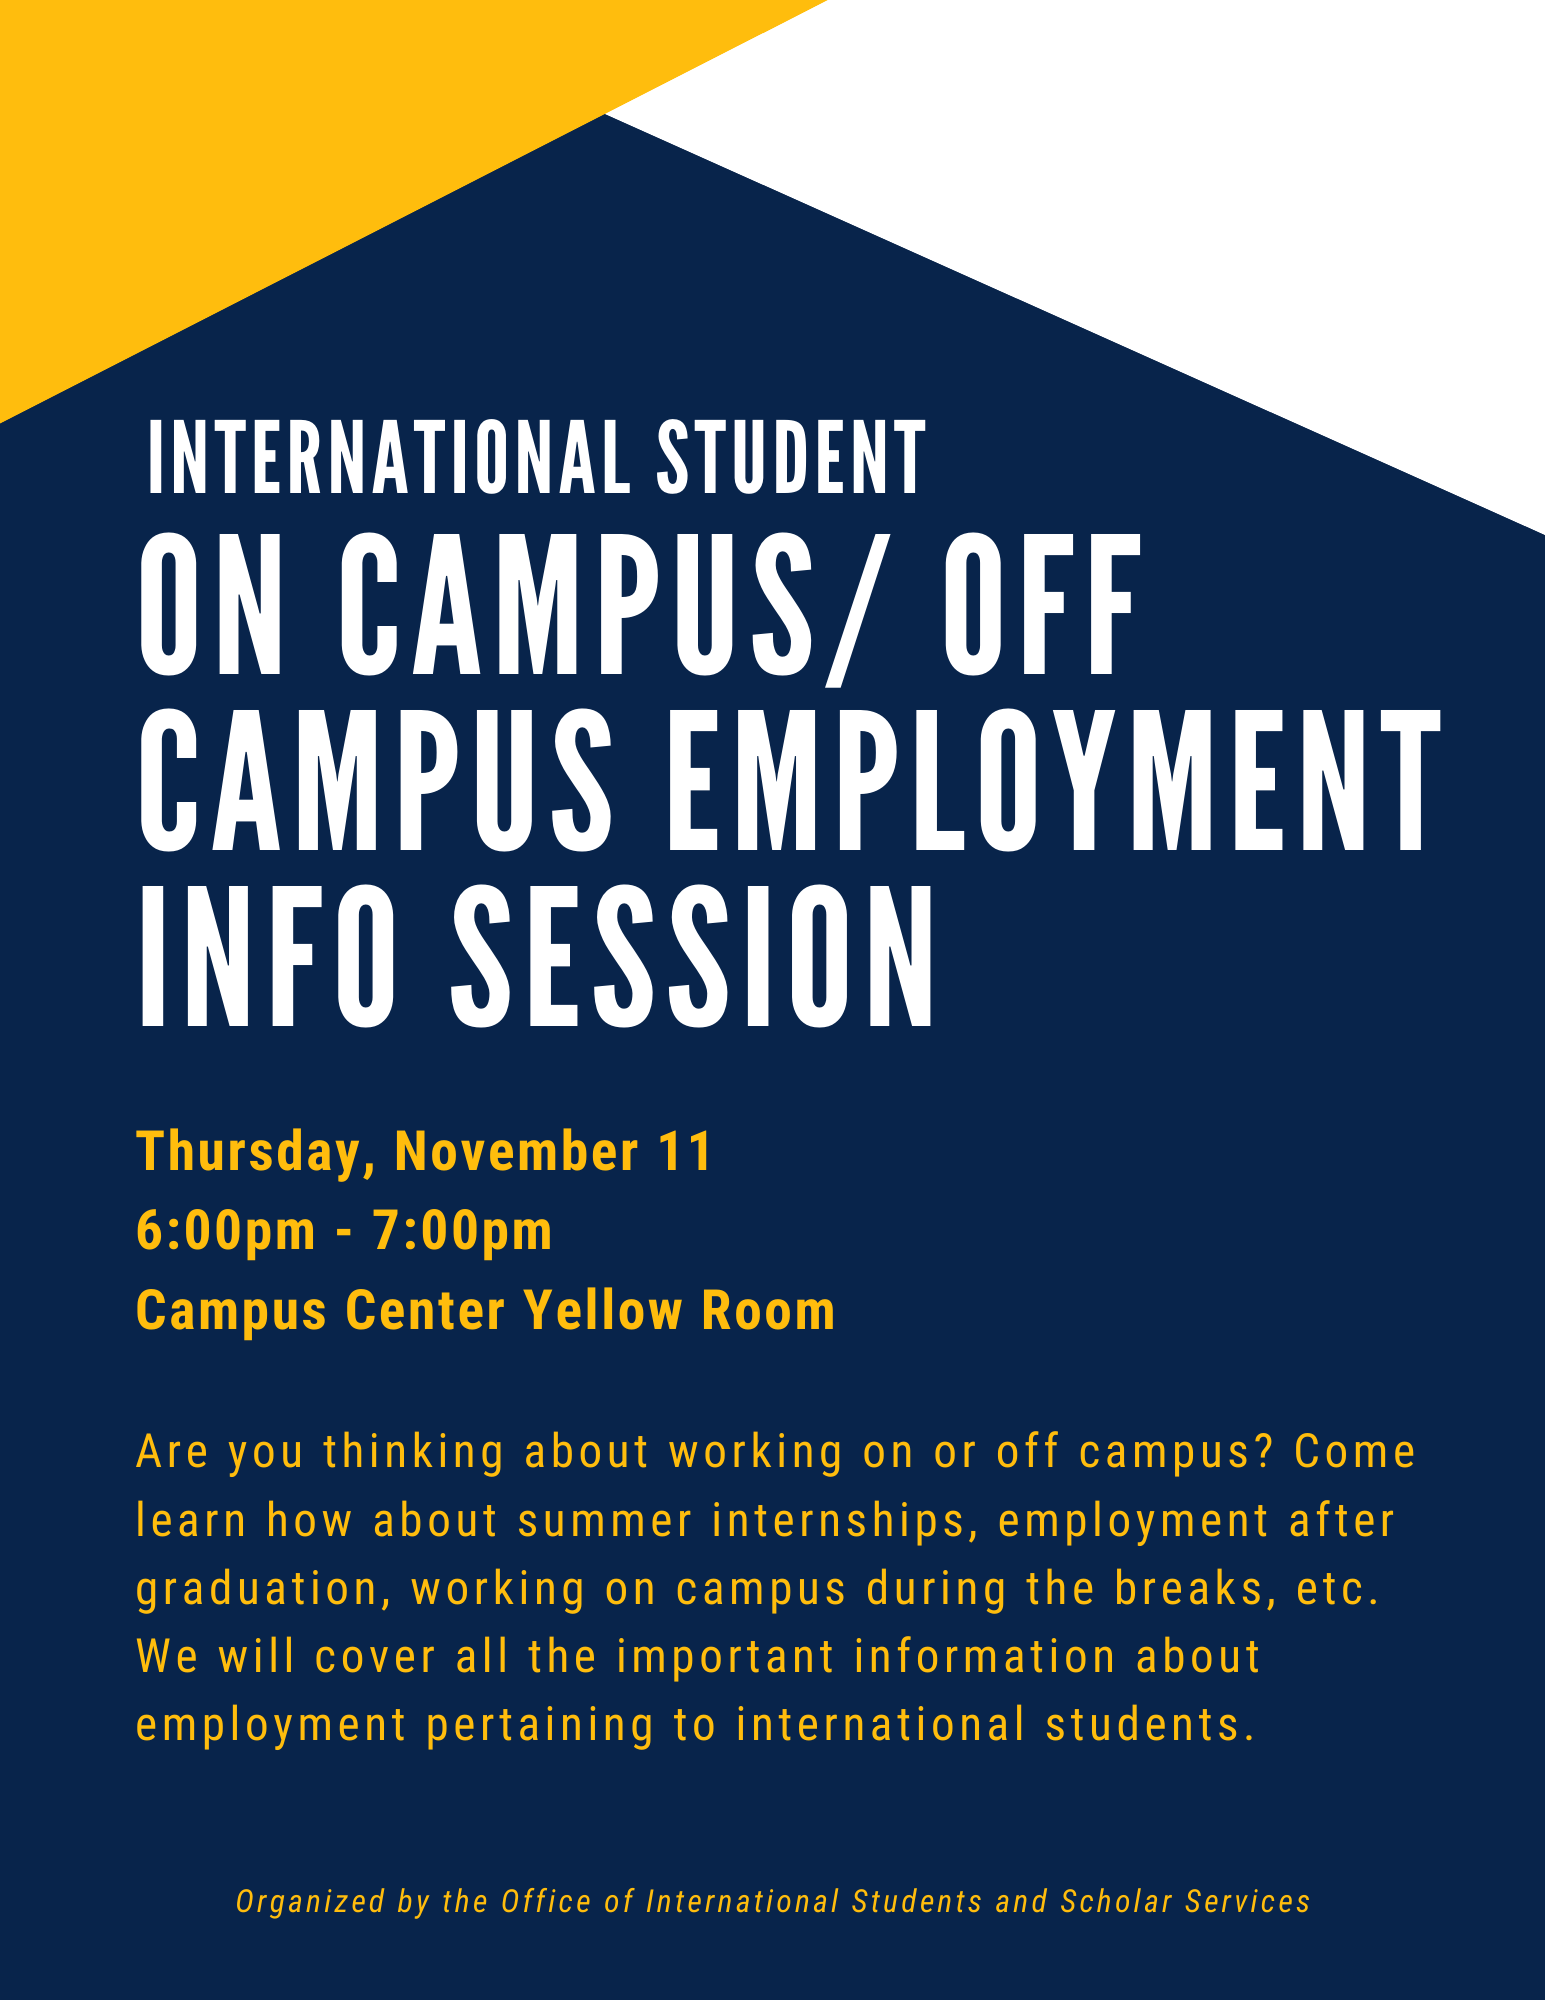 On Campus and Off Campus Employment for International Students